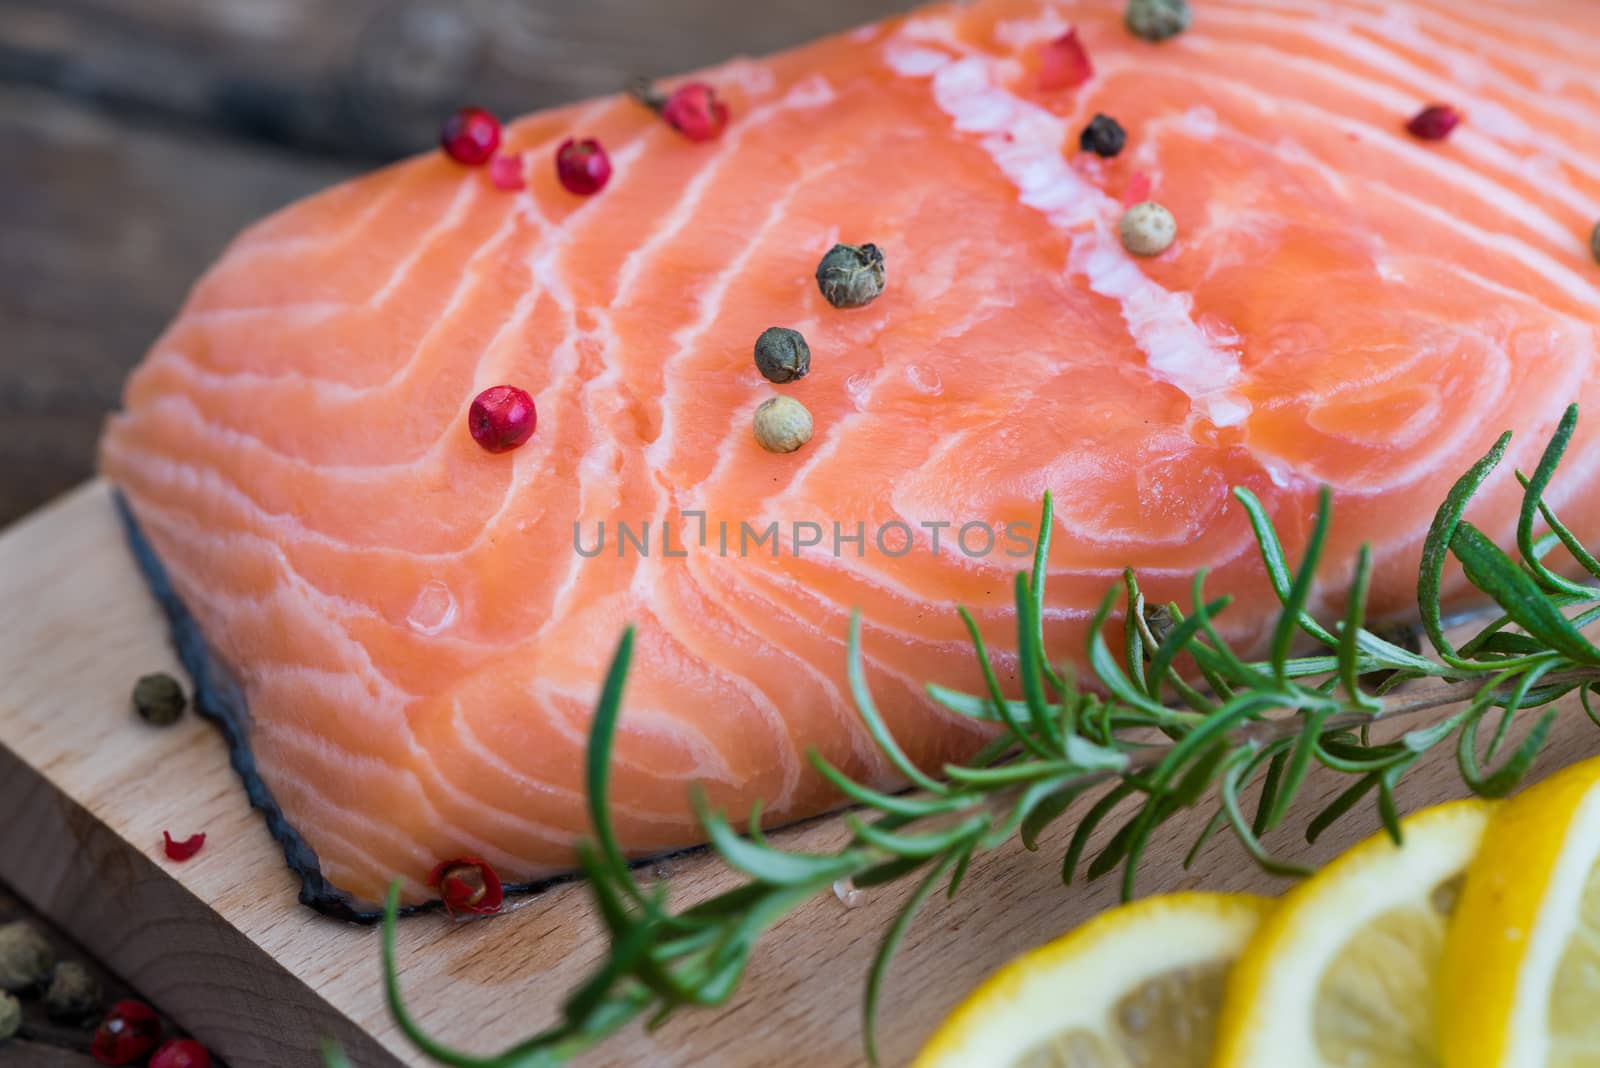 Raw Salmon Fish Fillet with Lemon, Spices and Fresh Herbs on Cutting Board